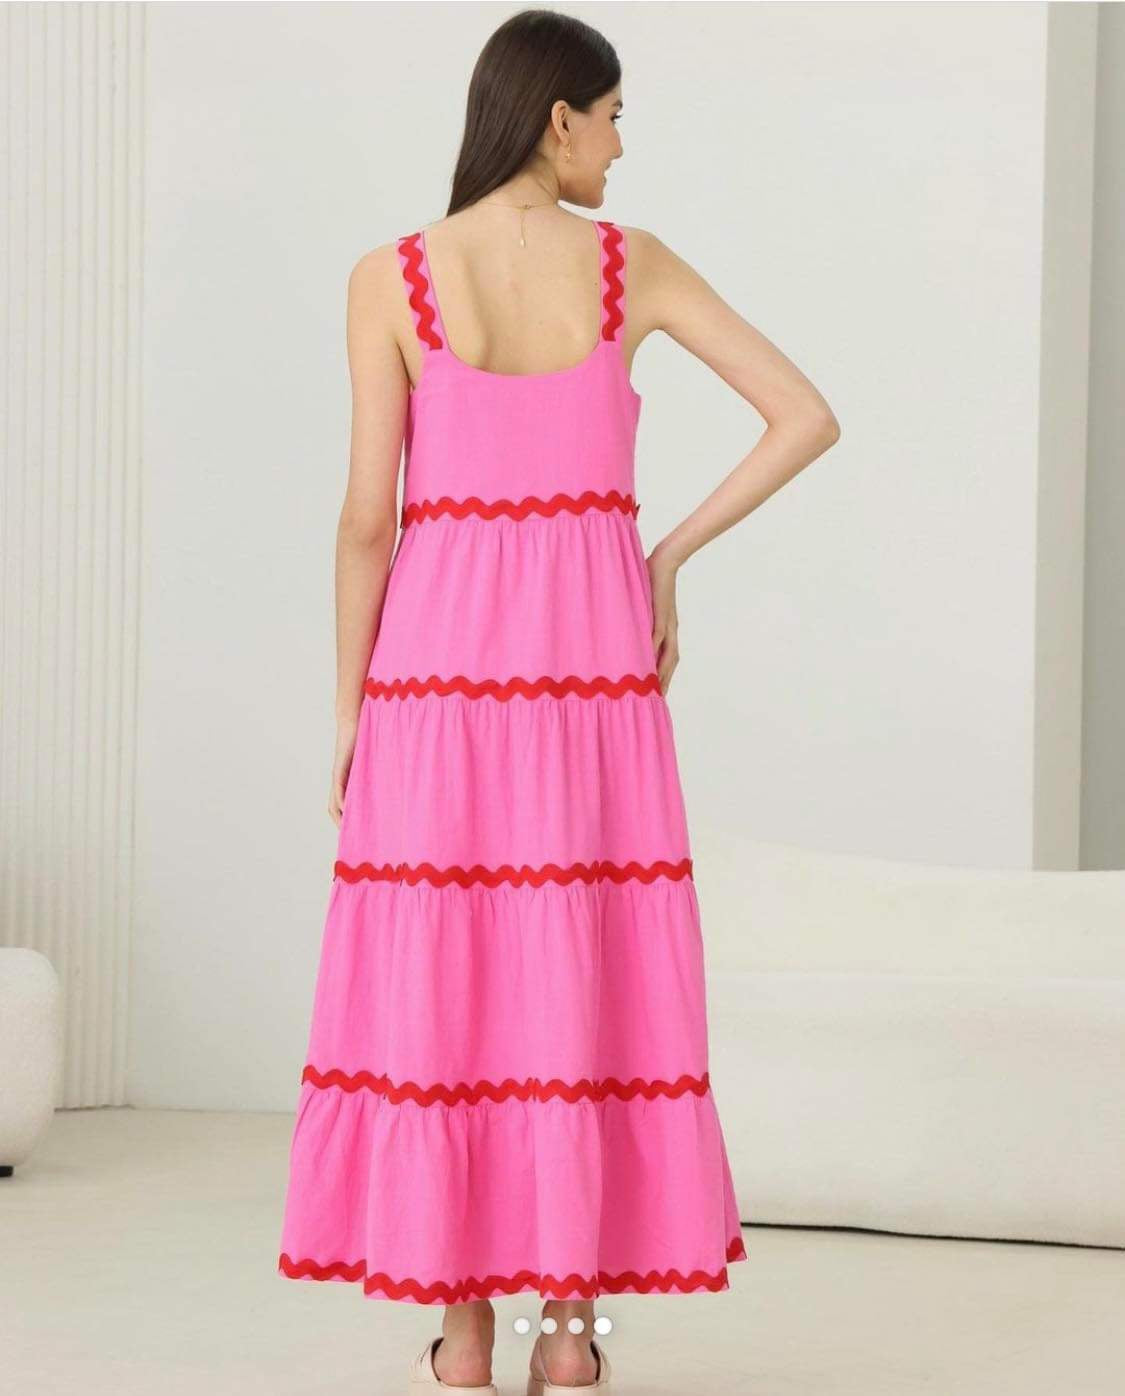 Sorrento Maxi Dress - Pink/Red